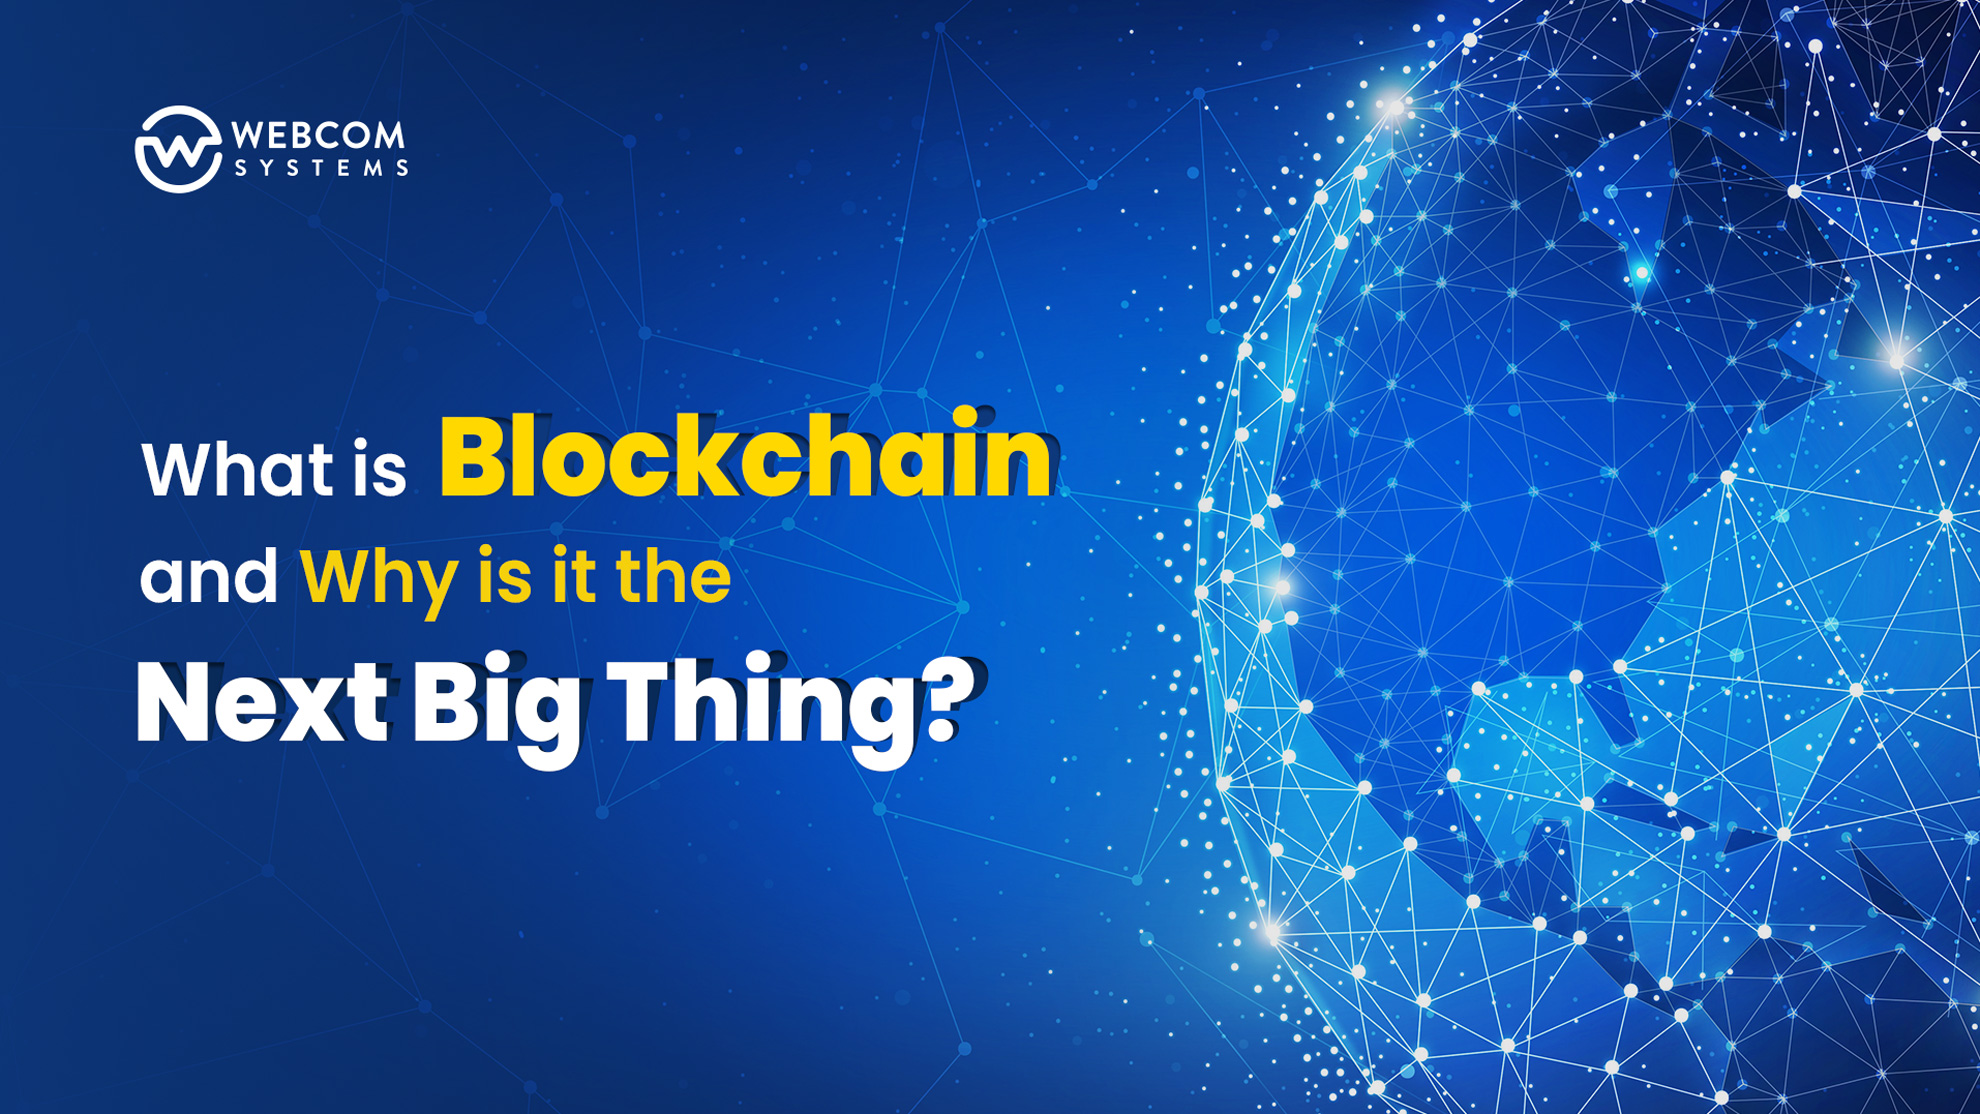 What is Blockchain and Why is it the Next Big Thing